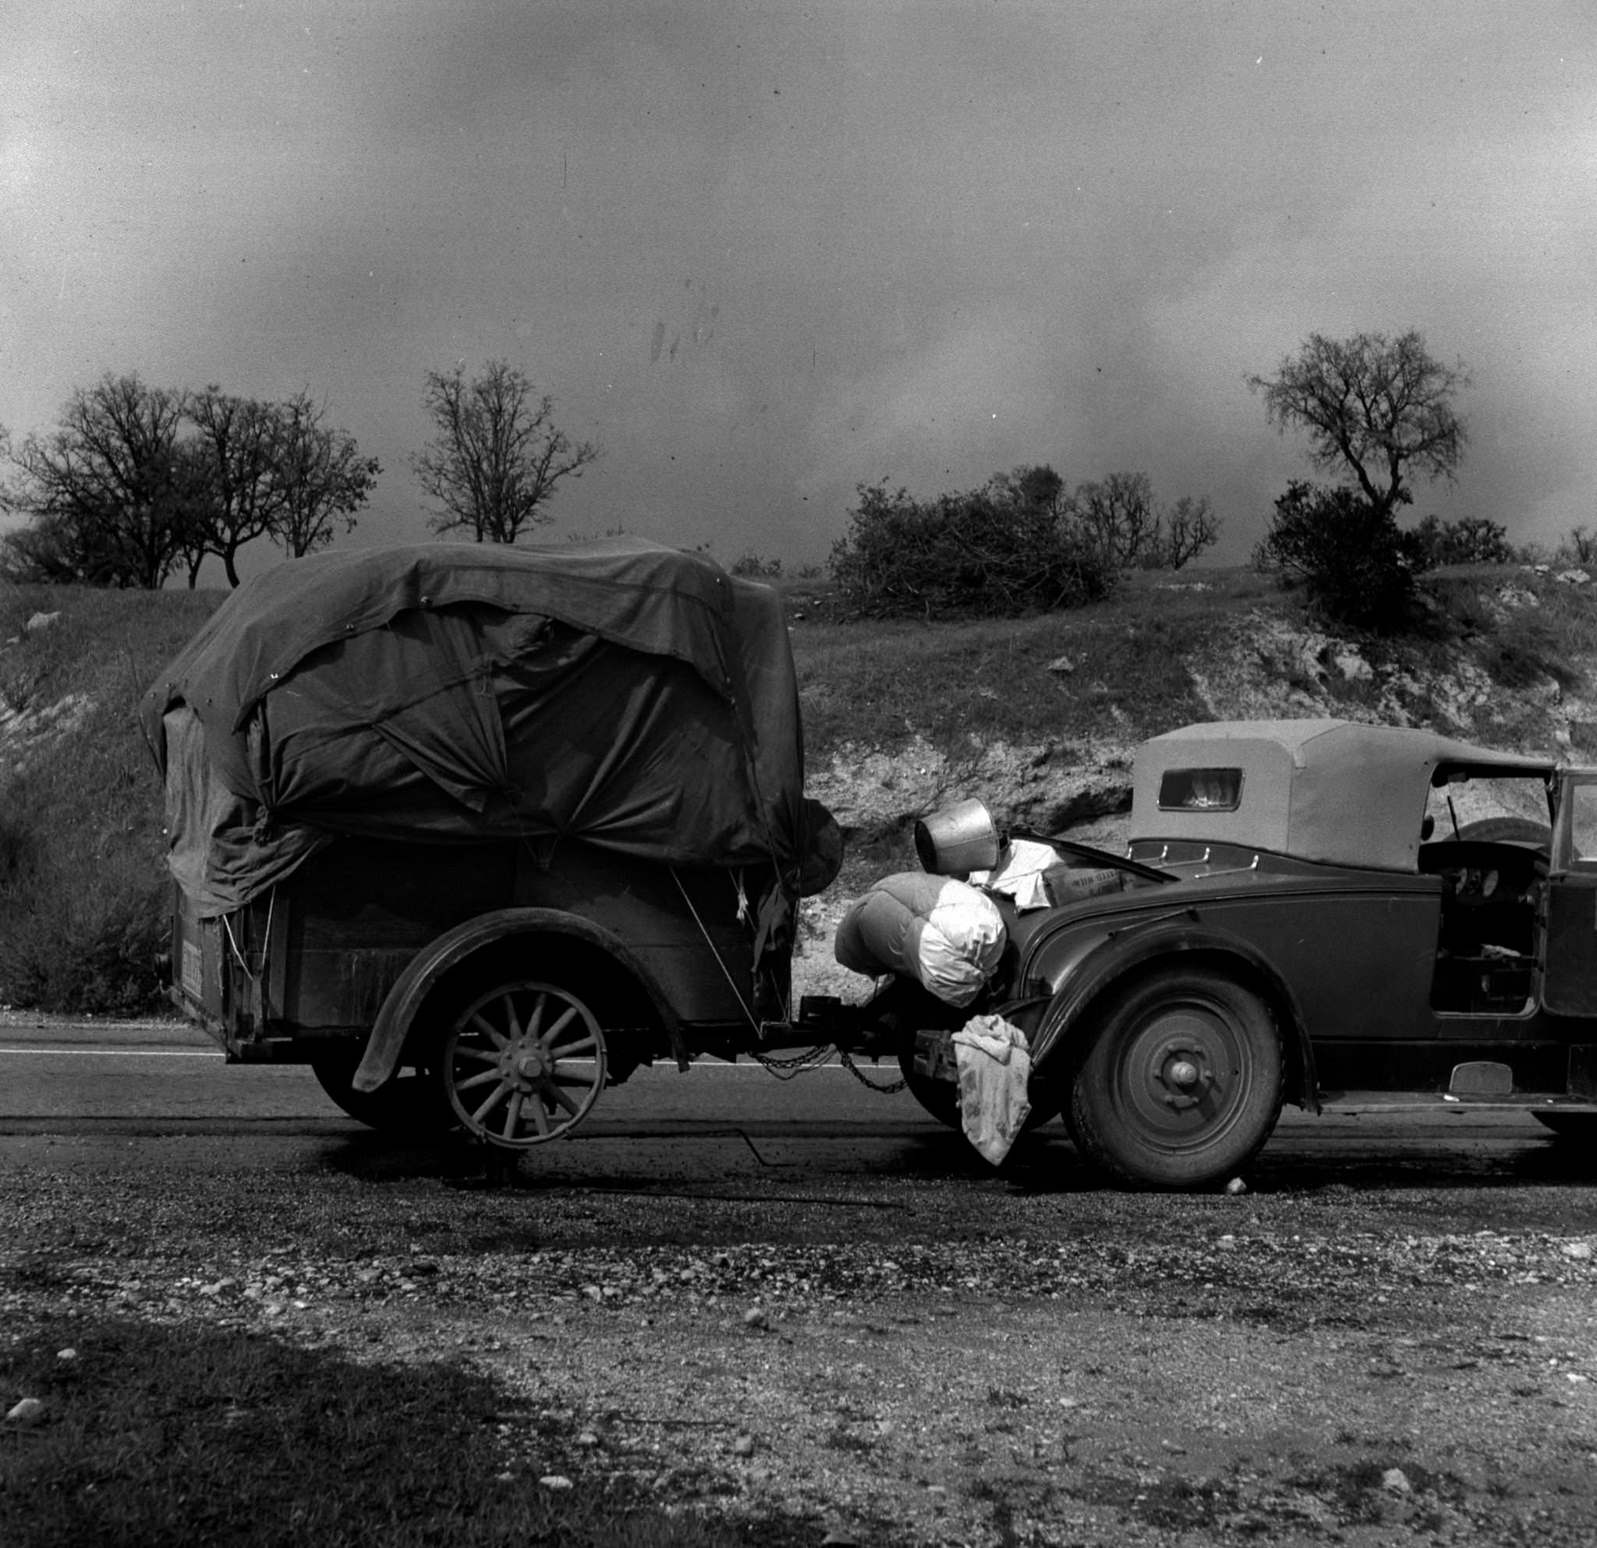 An oil worker builds himself a trailer and takes to the road, California, 1930s